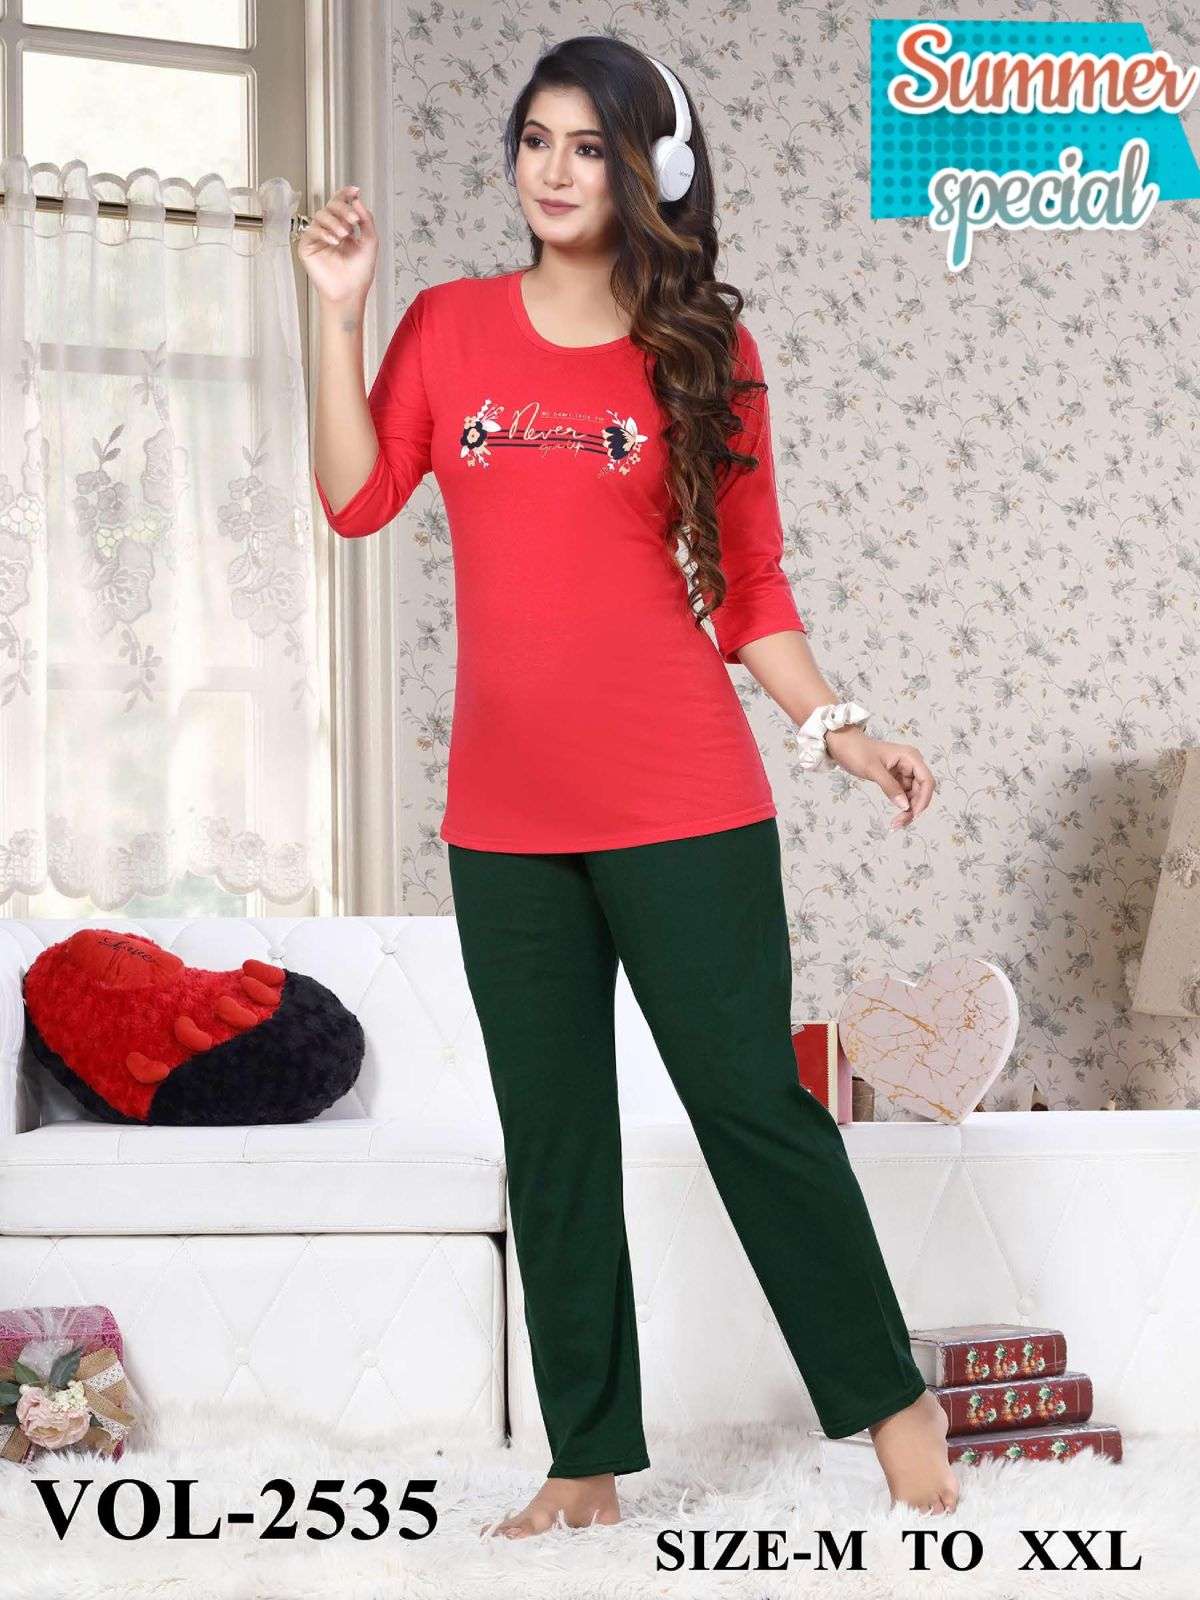 SUMMER SPECIAL VOL.2535 Heavy Shinker Hosiery Cotton Night Suits Full sleeve CATALOG WHOLESALER BETS RATE